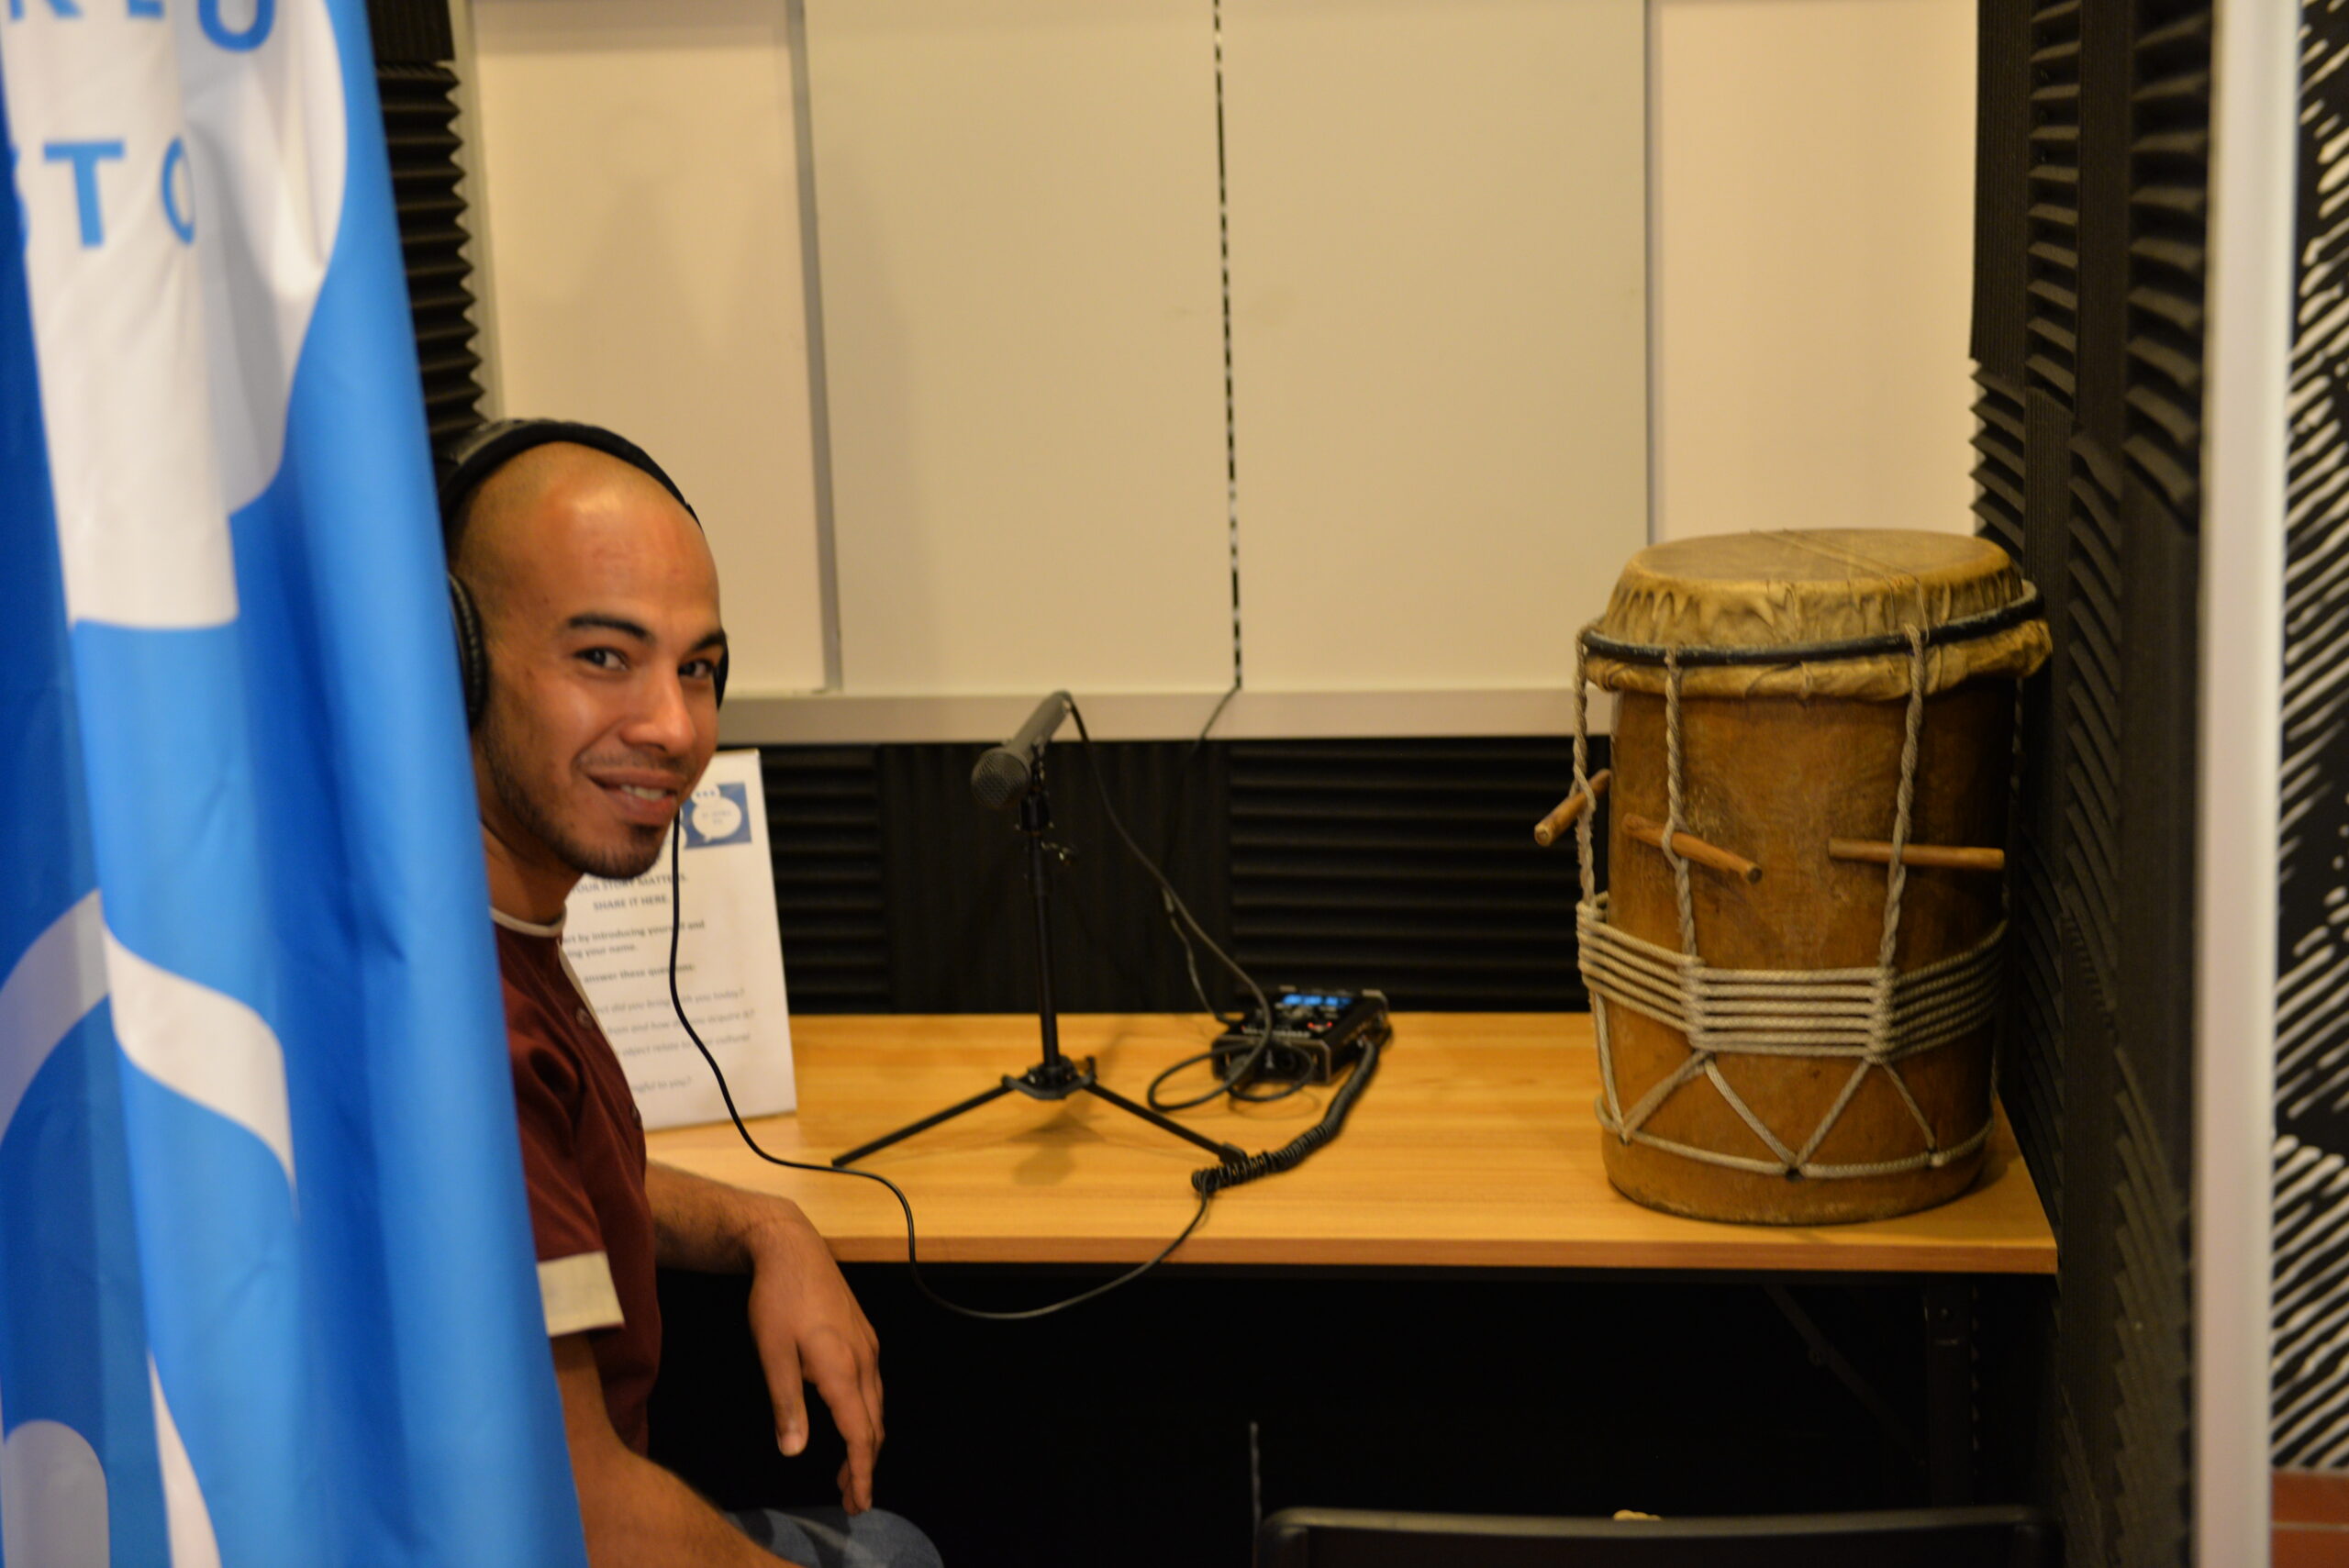 a man is sitting inside of a booth with headphones on and a microphone in front of him on the table. A drum made of wood sits on the table next to him.